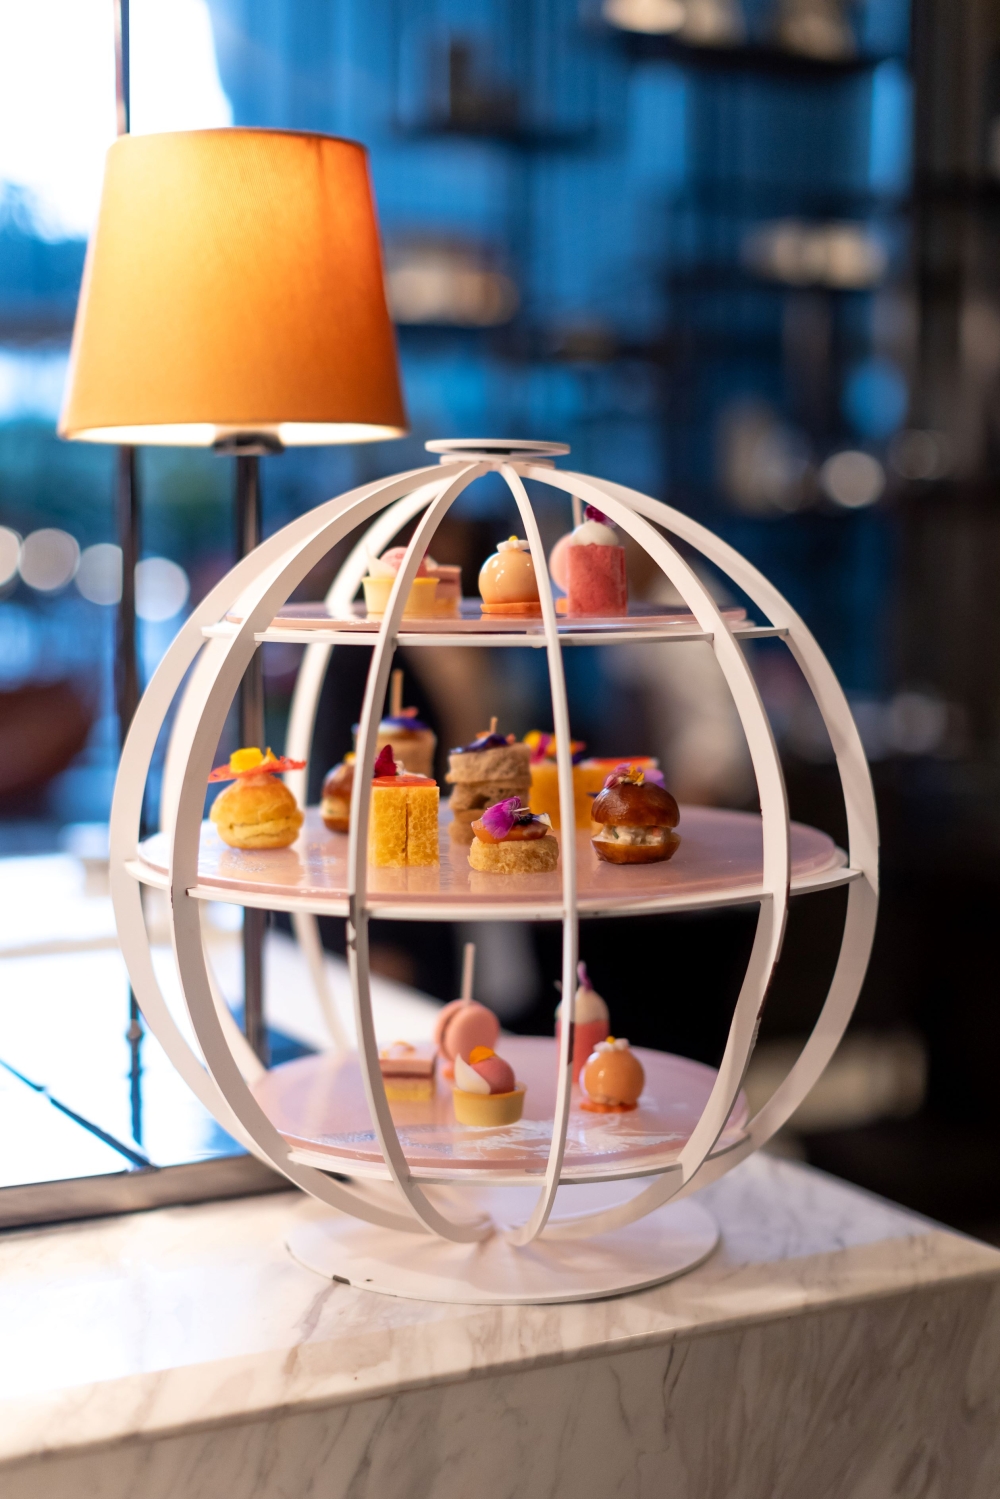 The Petit Chérie Afternoon Tea is available until May 31. — Picture courtesy of Kens Apothecary